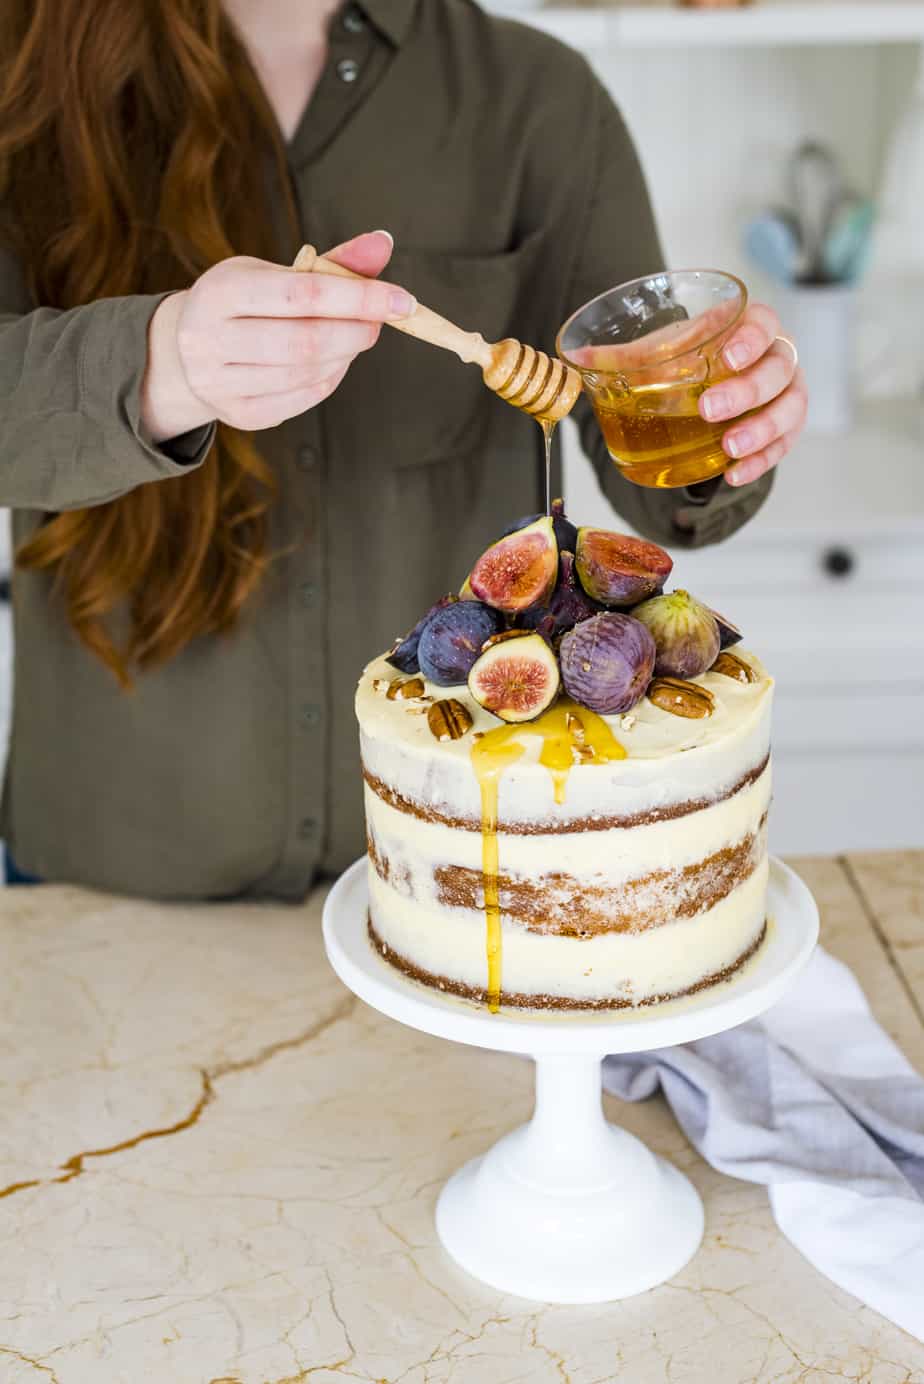 This Earl Grey Cake with Honey Mascarpone Frosting and Fresh Figs is the perfect recipe for World Baking Day, made with Stork Bake to keep it fresher for longer, it's bound to have everyone licking their plates clean.